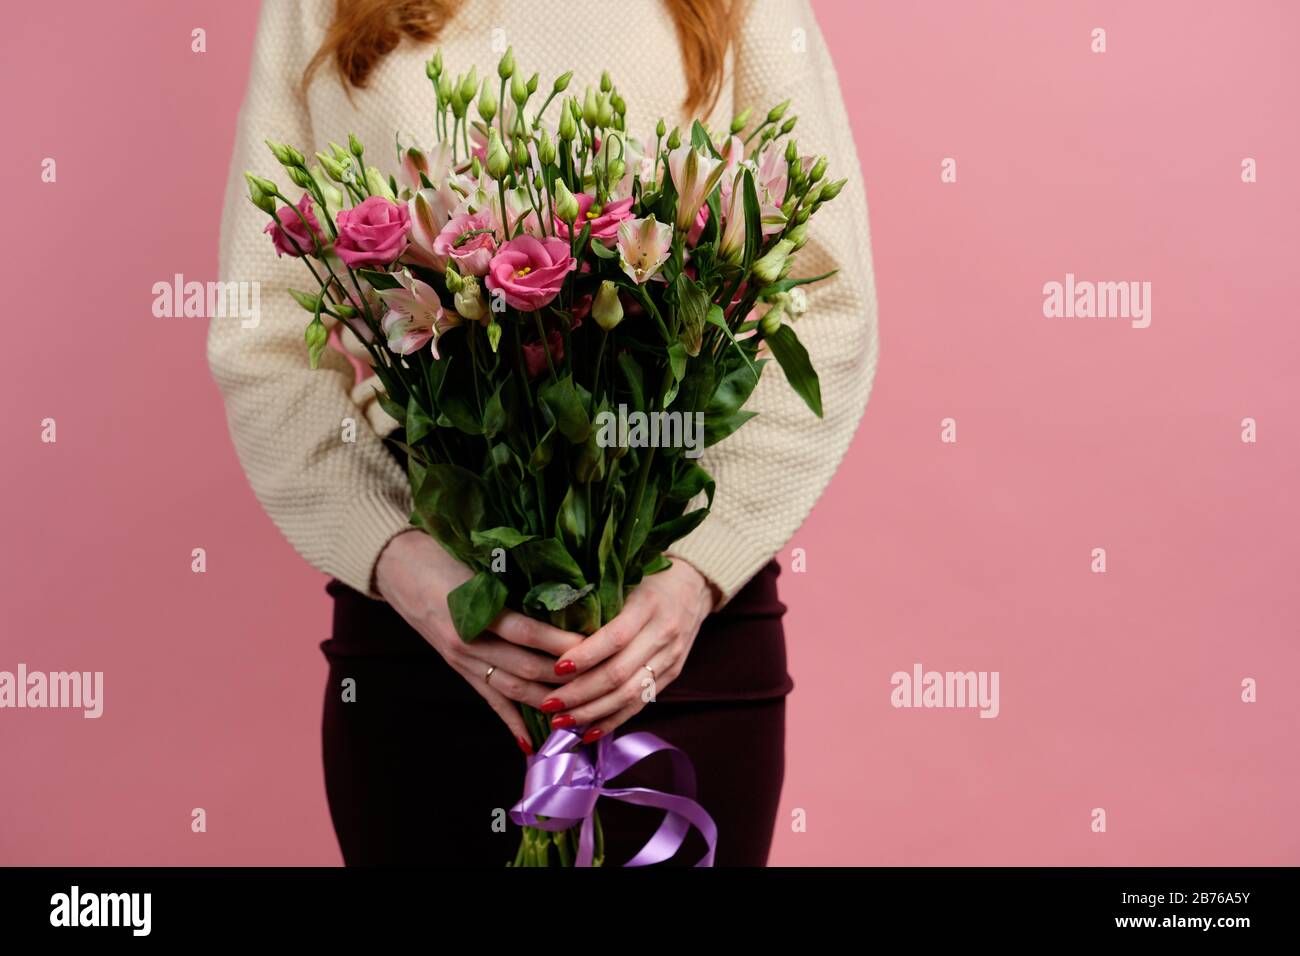 A tall bouquet of pink alstroemeria and eustomas in the hands of a red-haired girl standing on a pink background Stock Photo